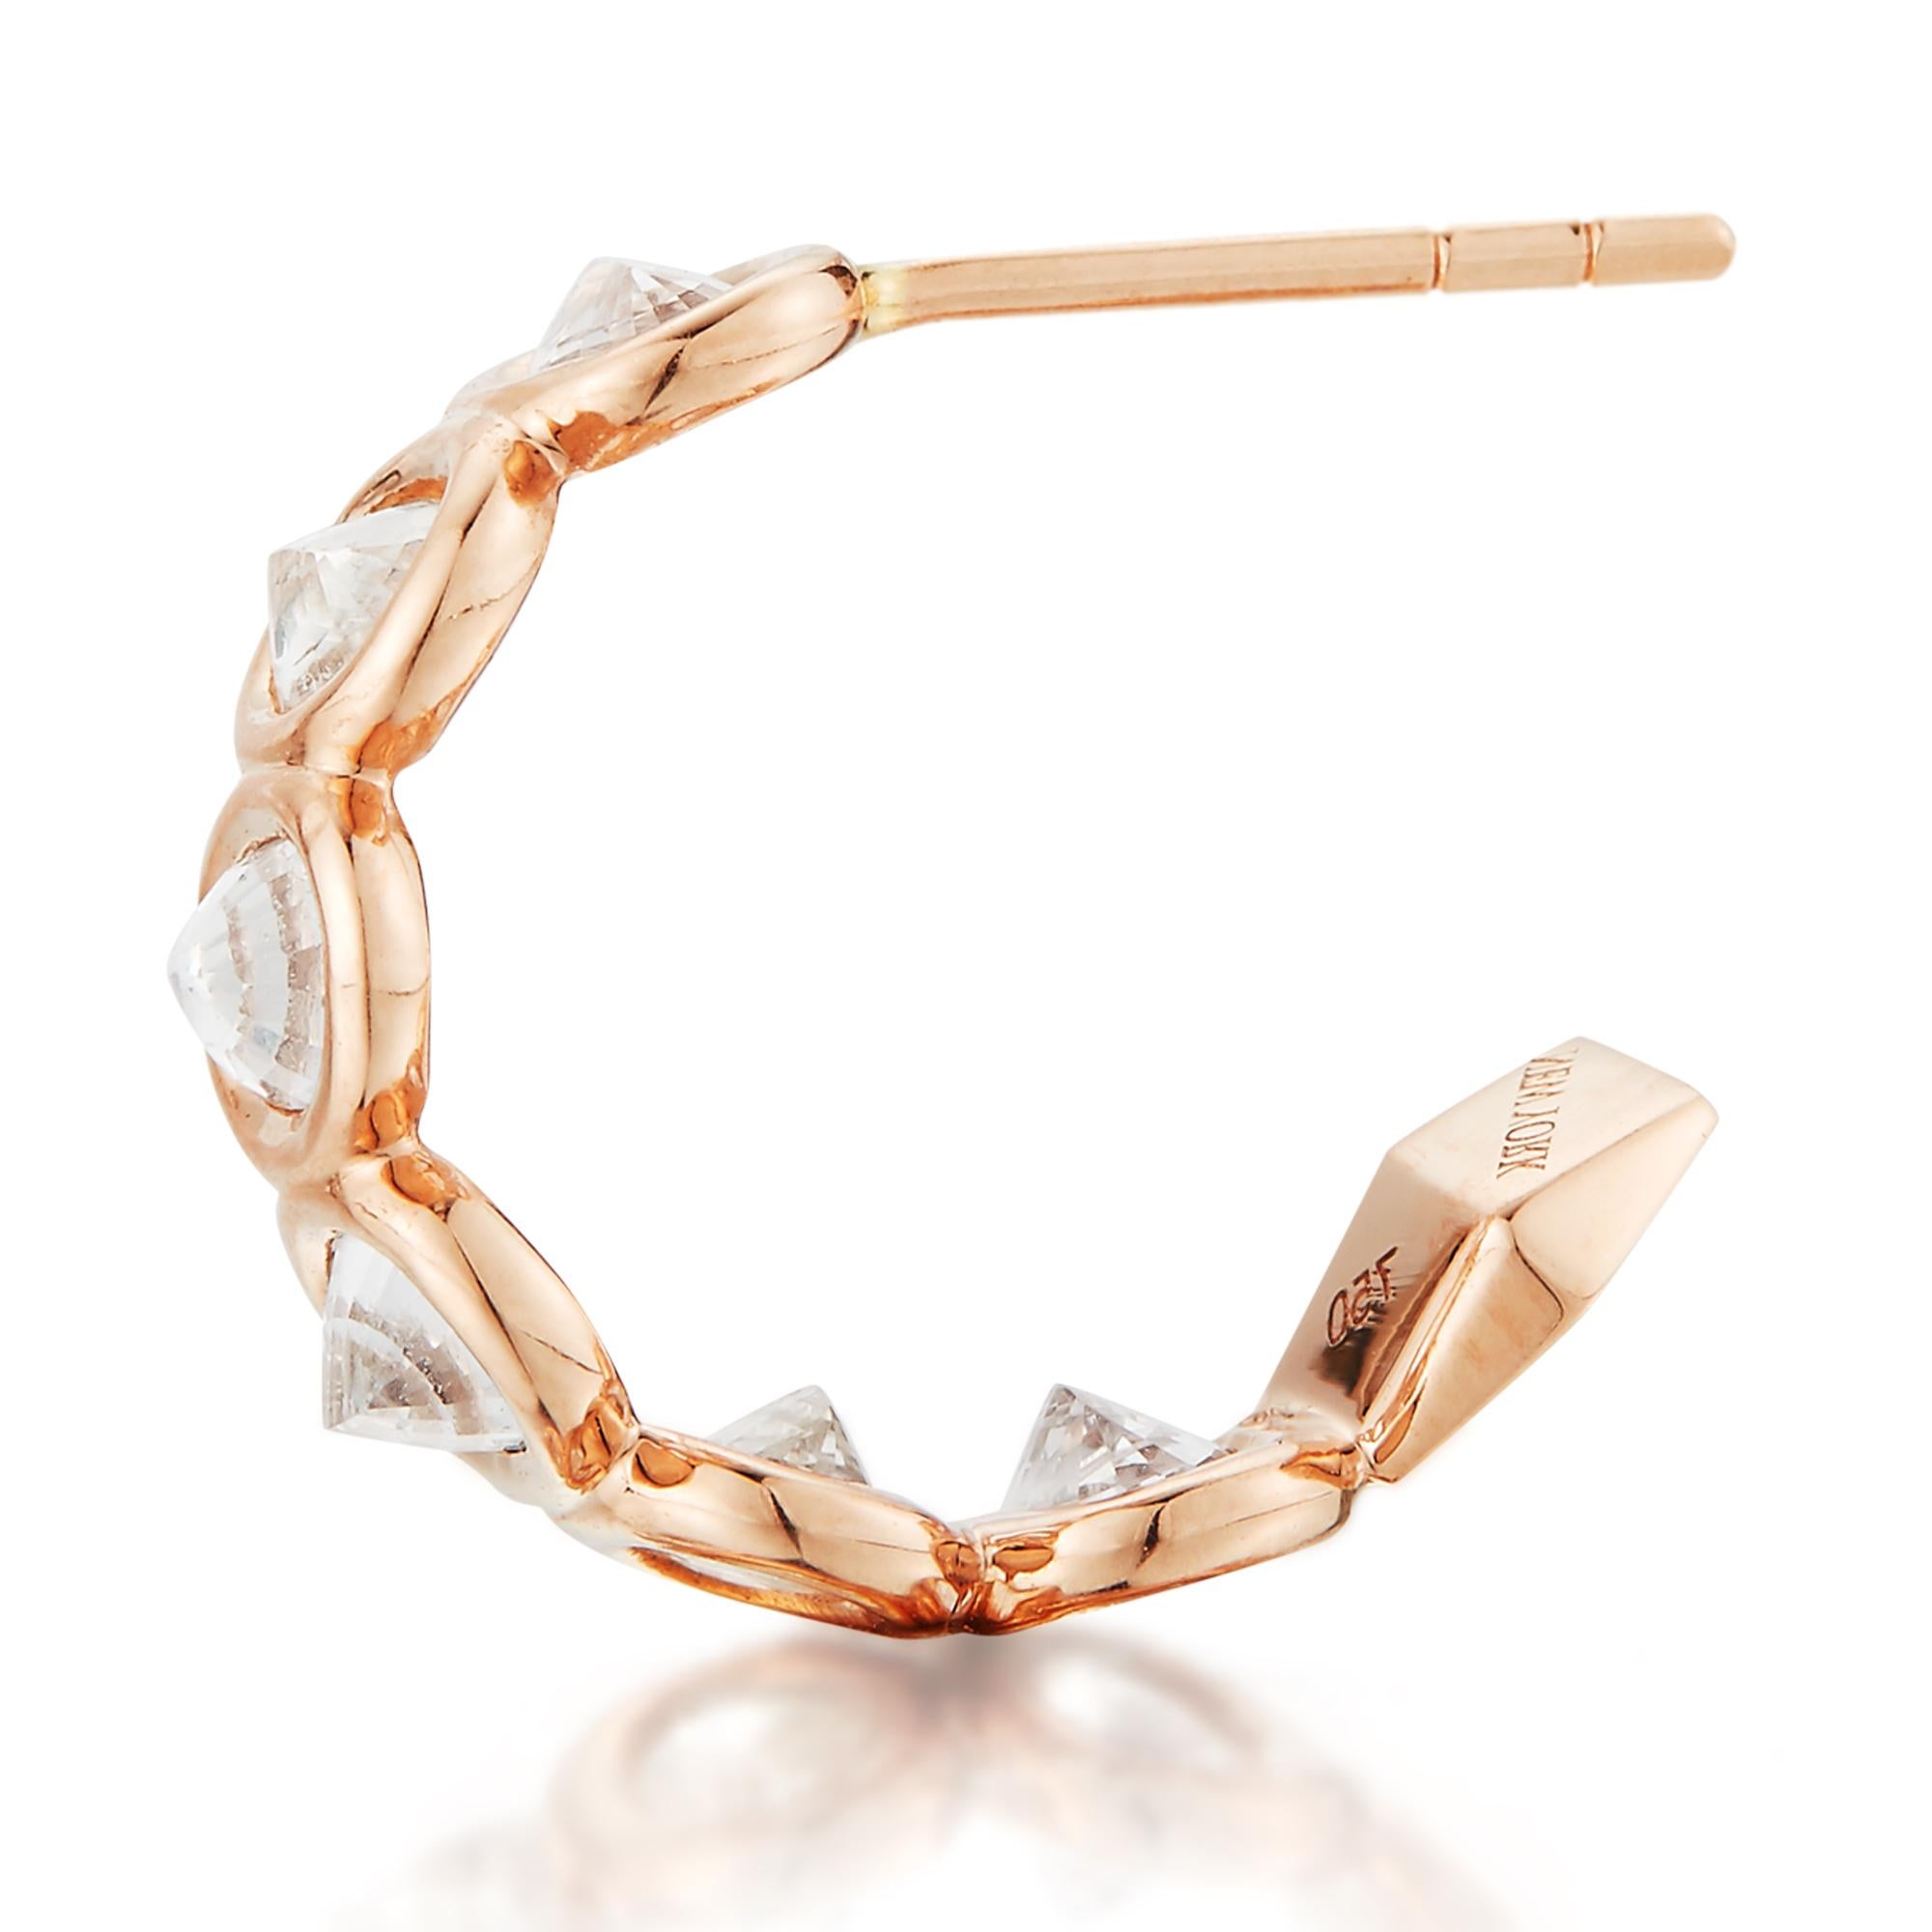 18kt rose gold Ombré hoop earrings with bezel set multishade oval white sapphires and signature Brillante® motif, petite. 

Reimagined from summers spent at the Tuscan shore, the Ombré collection highlights the diverse hues and textures found in